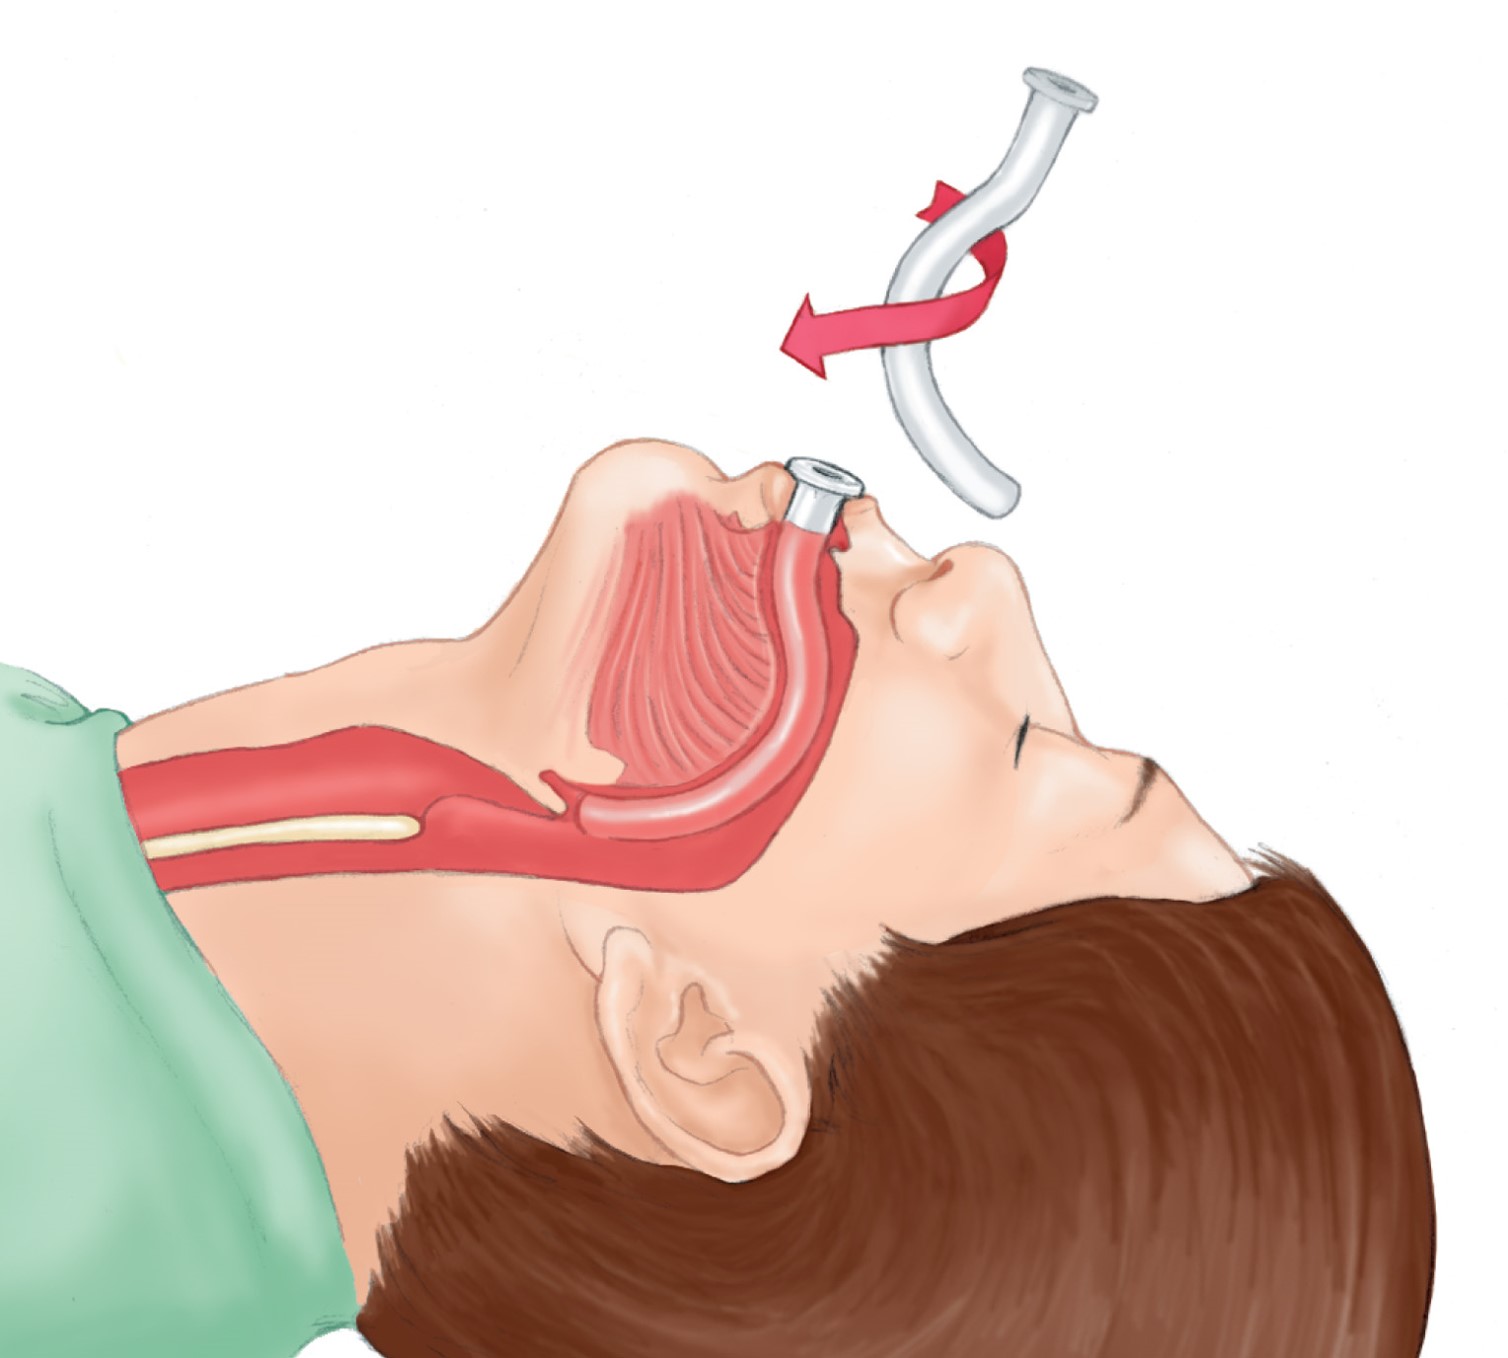 Proper placement of oropharyngeal airway.